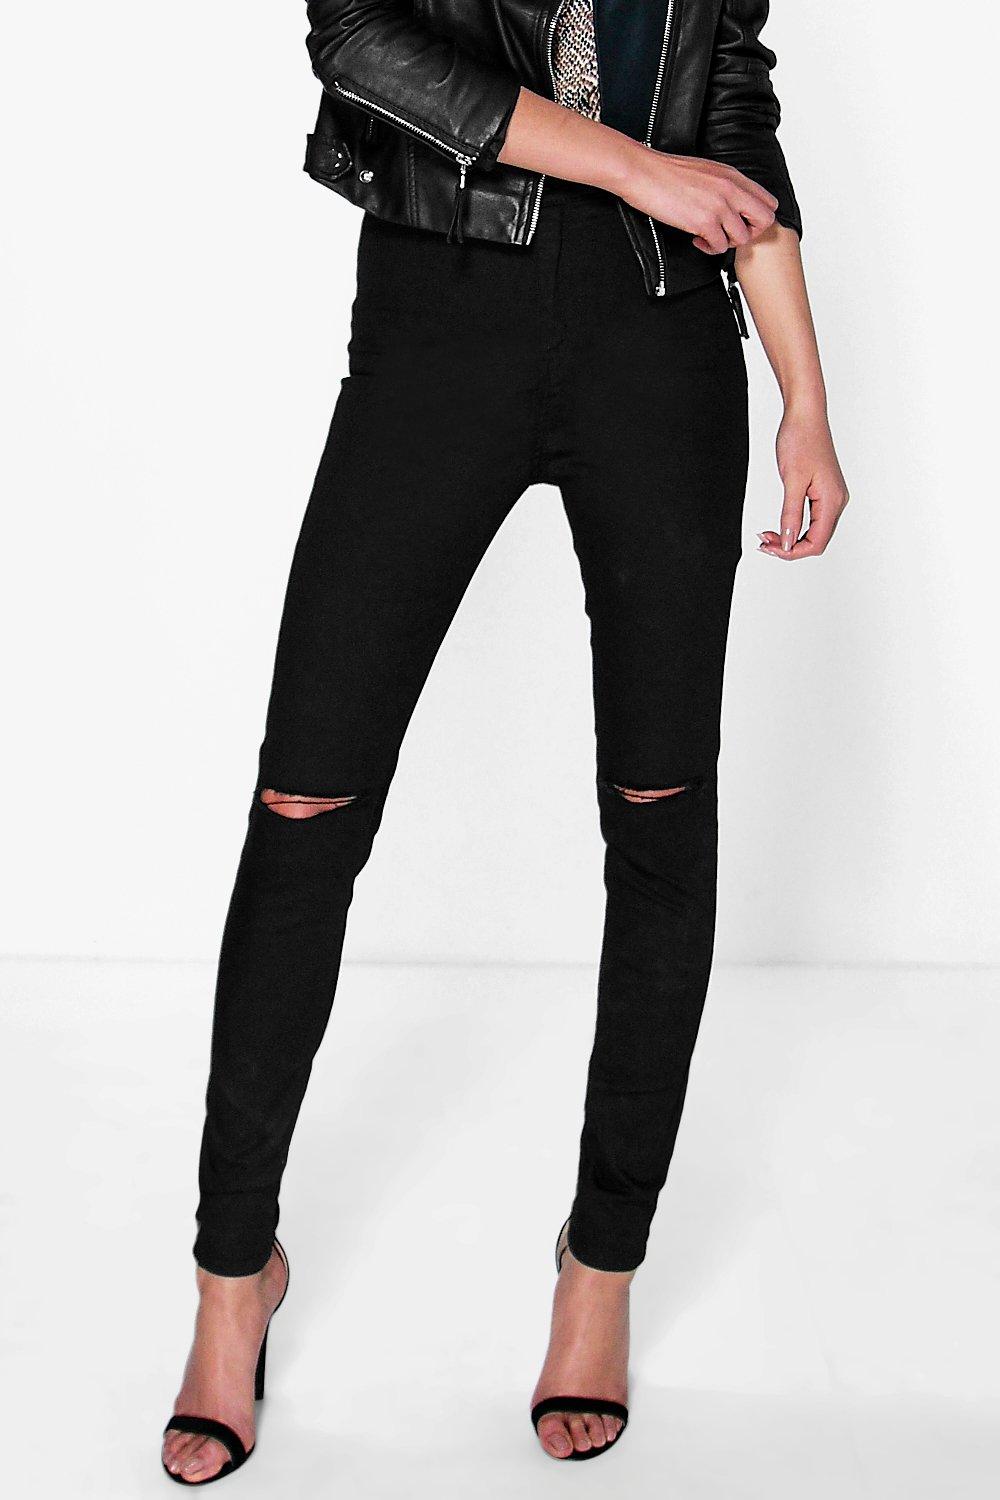 black jeans with knee rips